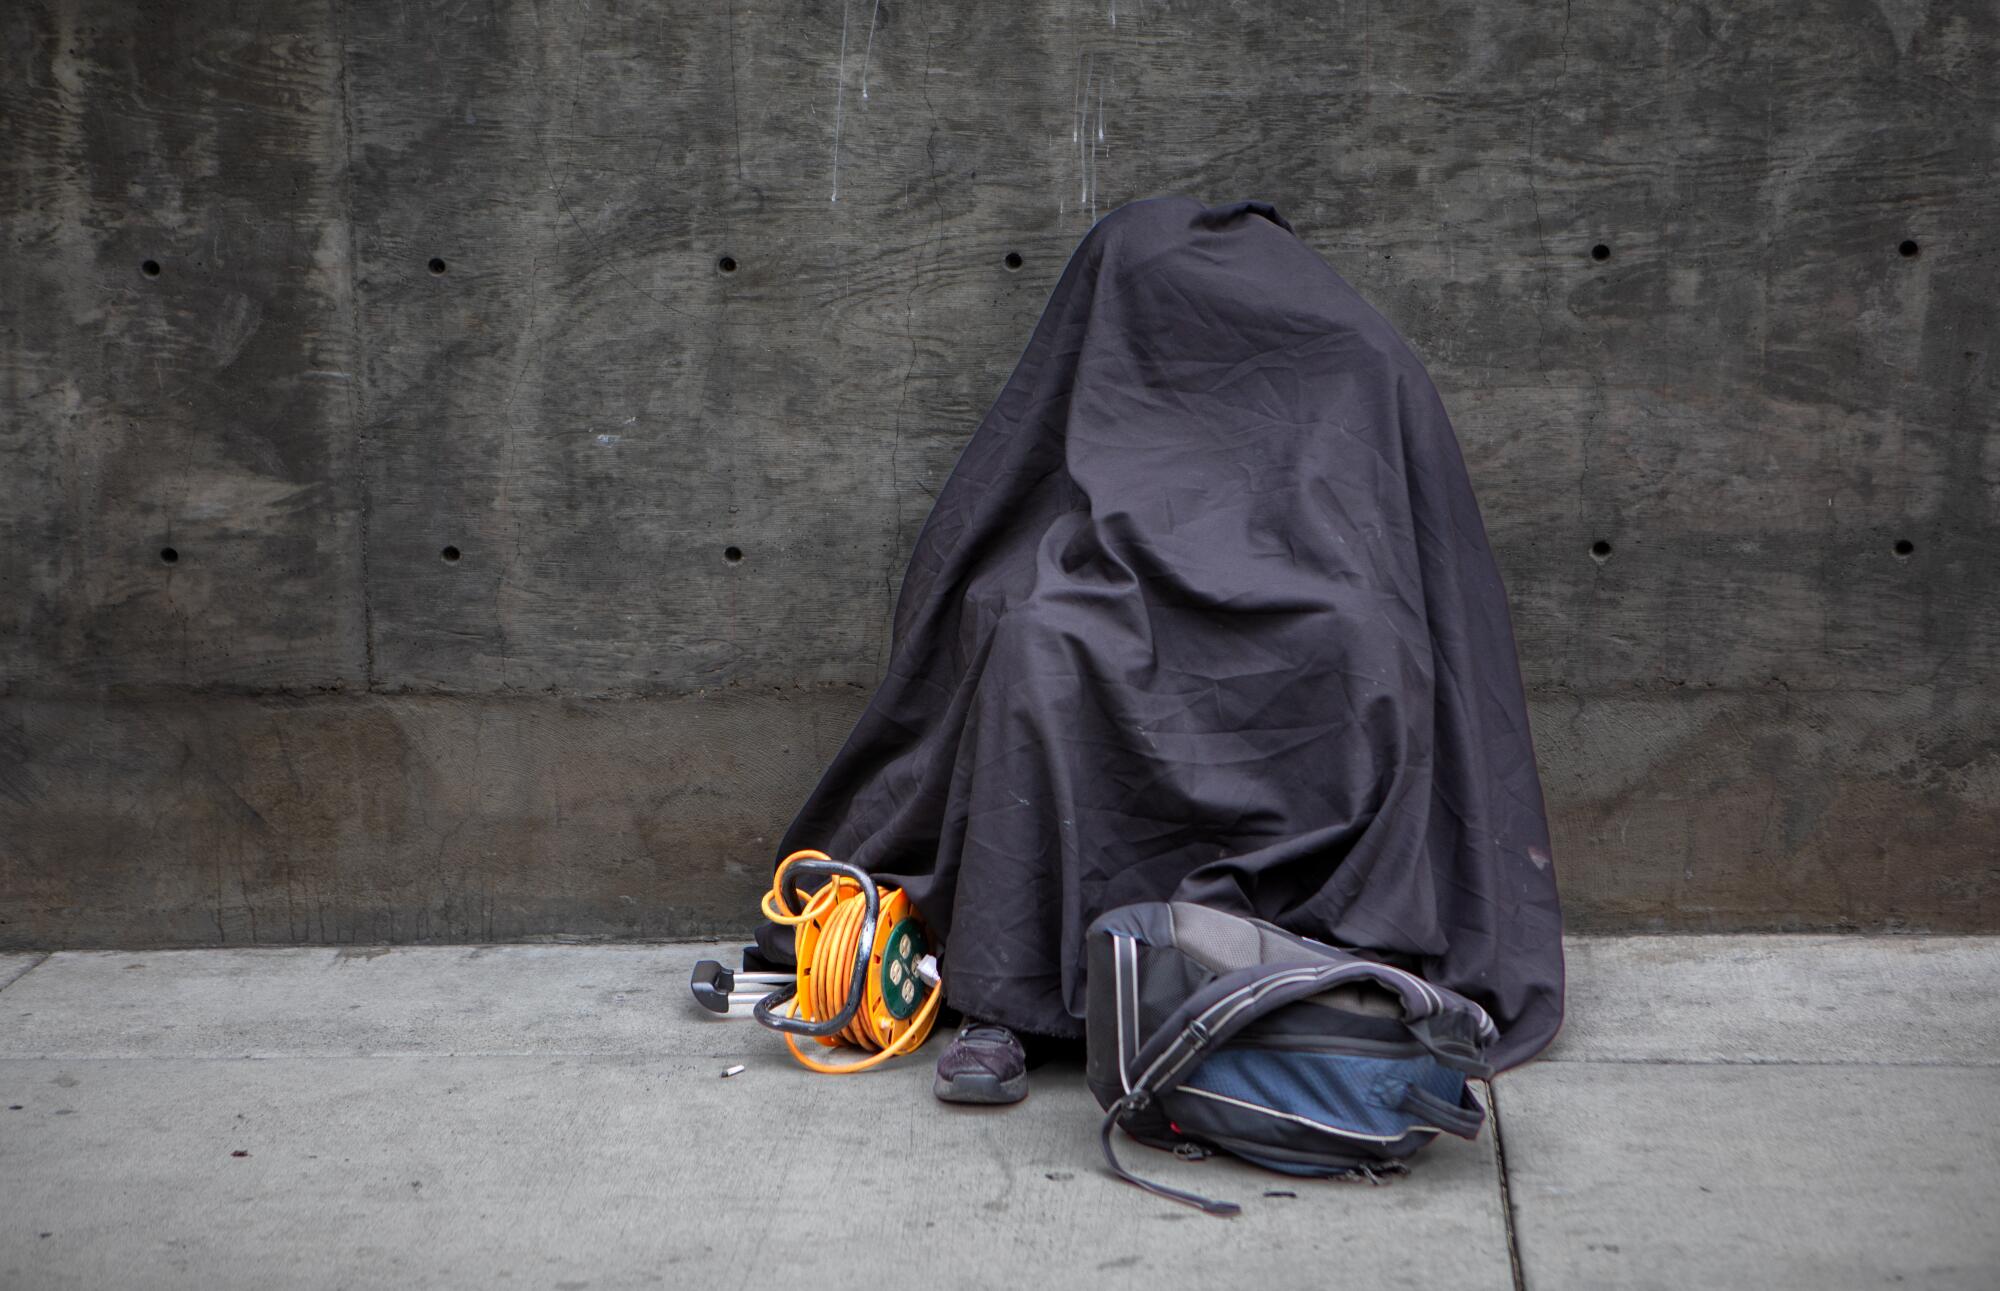 A personcovered in cloth sits on a sidewalk.